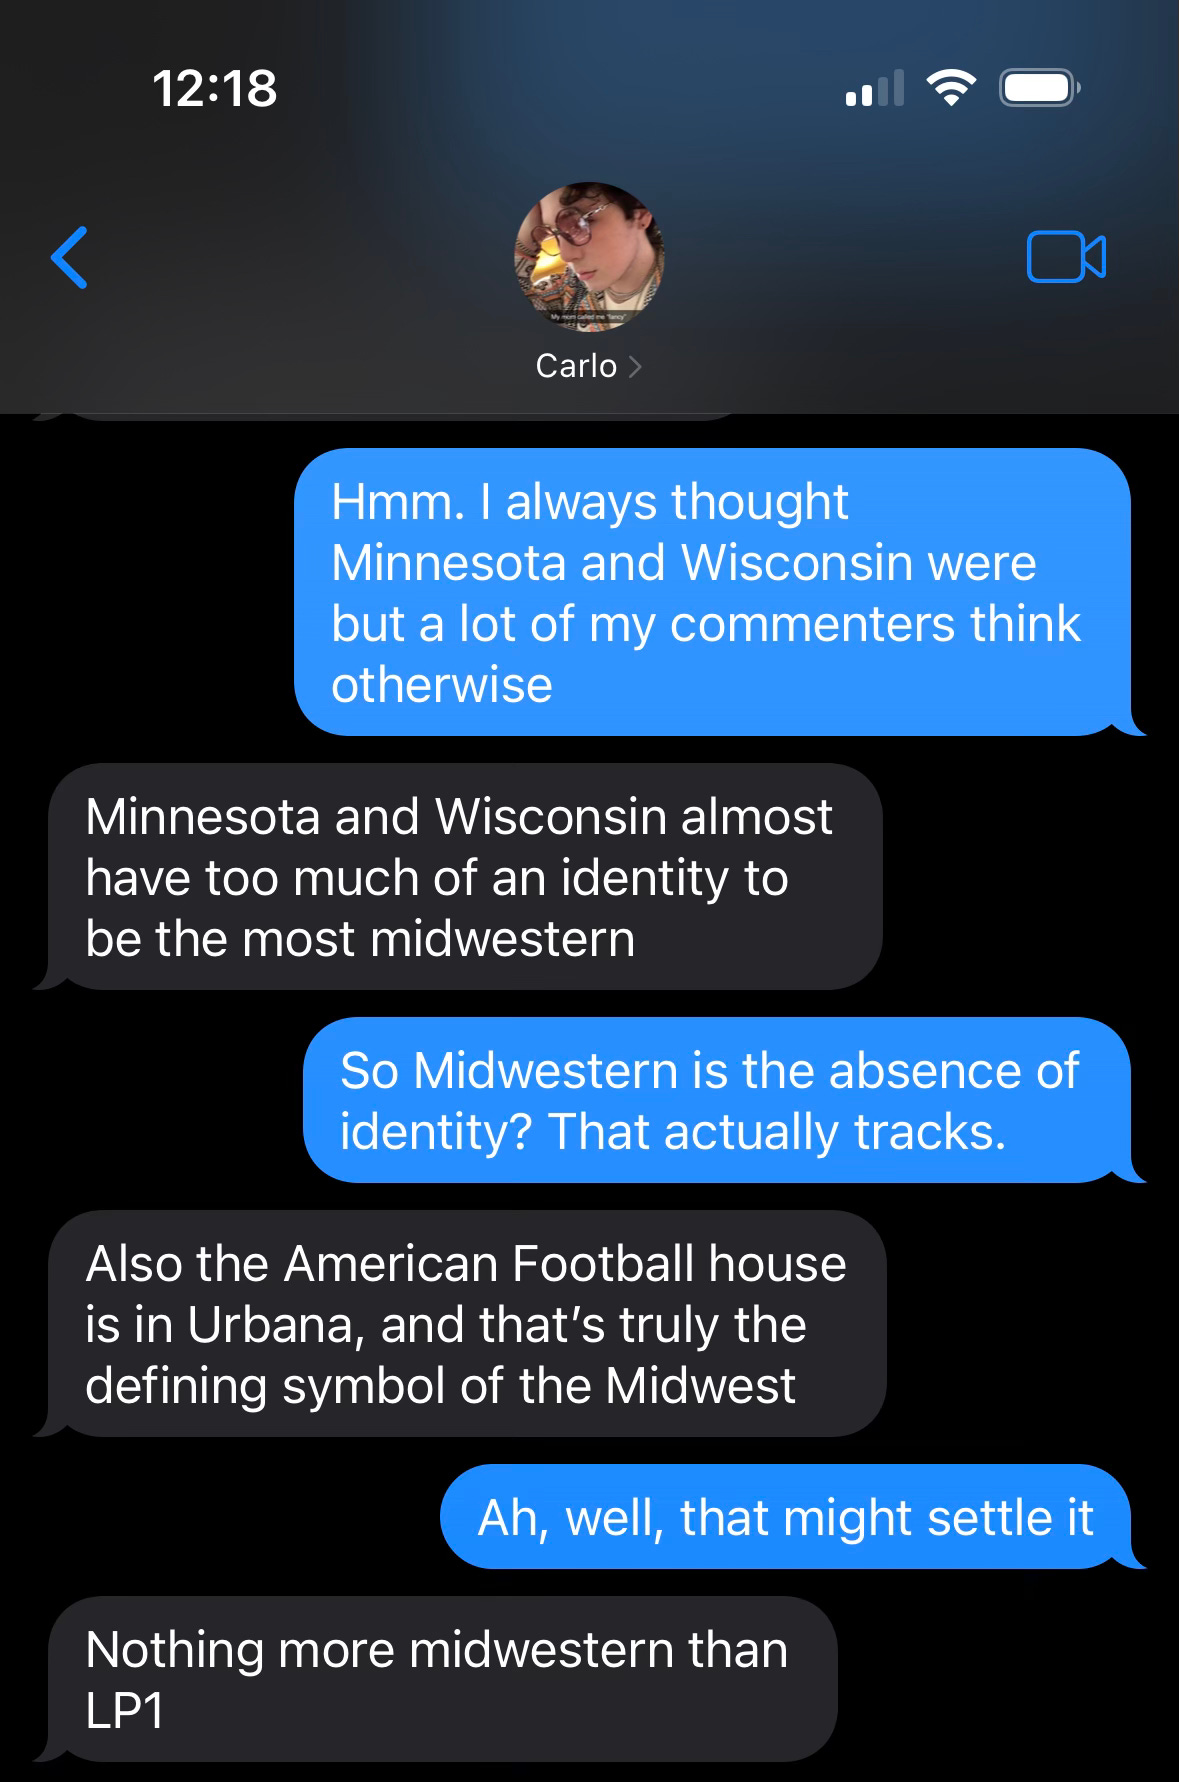 Carlo telling me that Minnesota and Wisconsin almost have too much identity to be the most Midwestern. And that the house from the cover of the album "LP1" from the band American Football is in Urbana, Illinois, and that since that's the quintessential Midwestern Emo album, Illinois has to be the most Midwestern state.